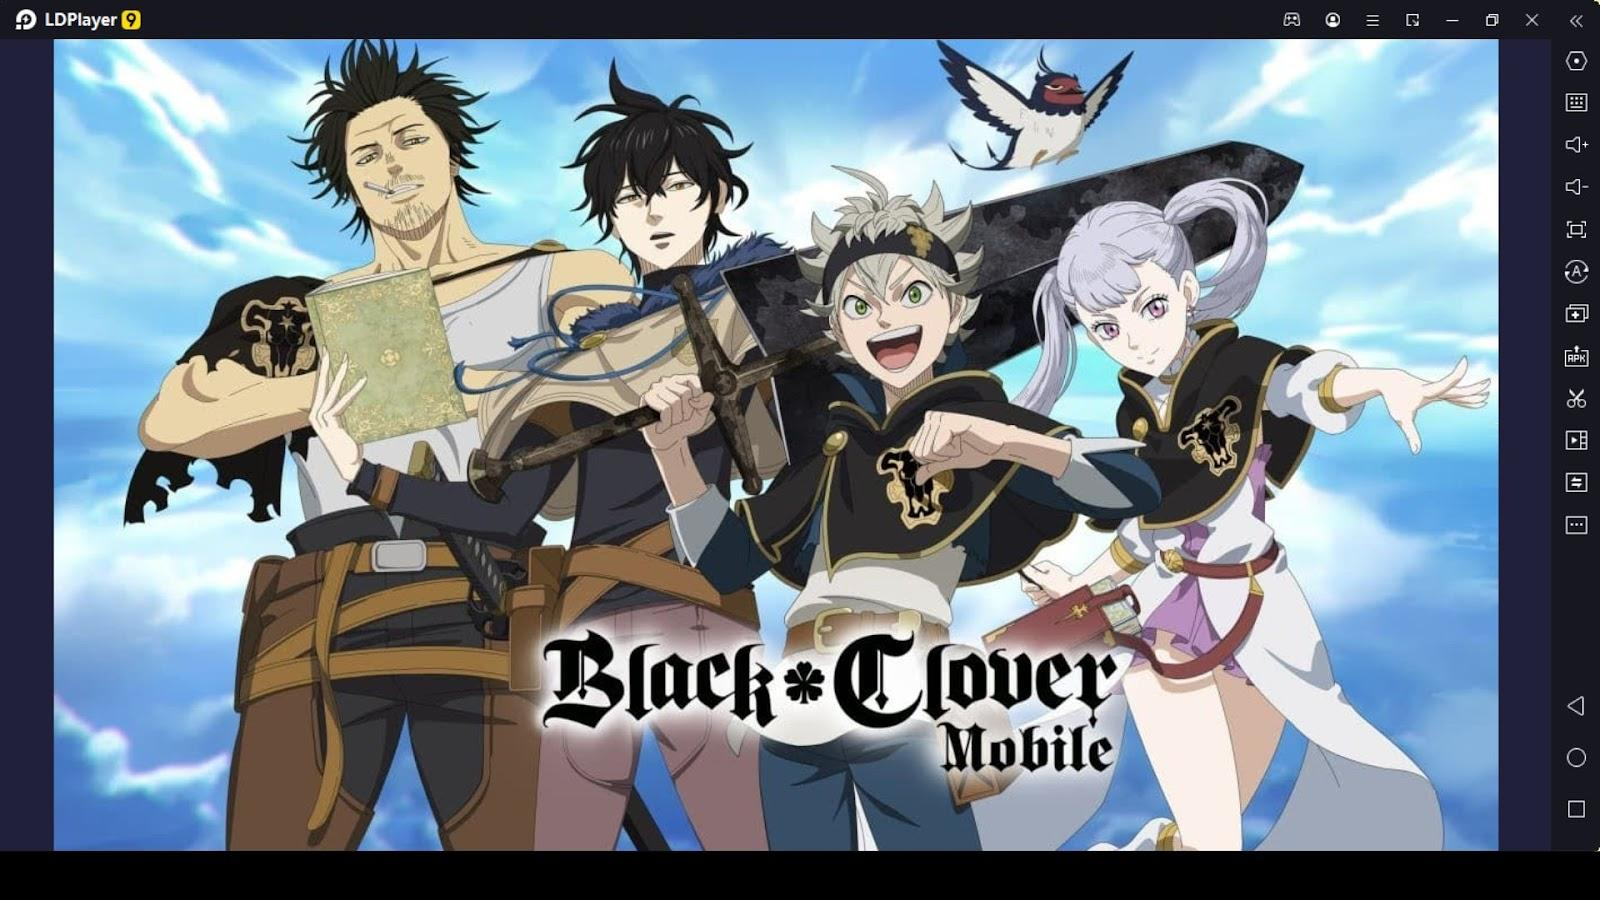 Black Clover Mobile - The Best Team Building Guide for Beginners-Game  Guides-LDPlayer